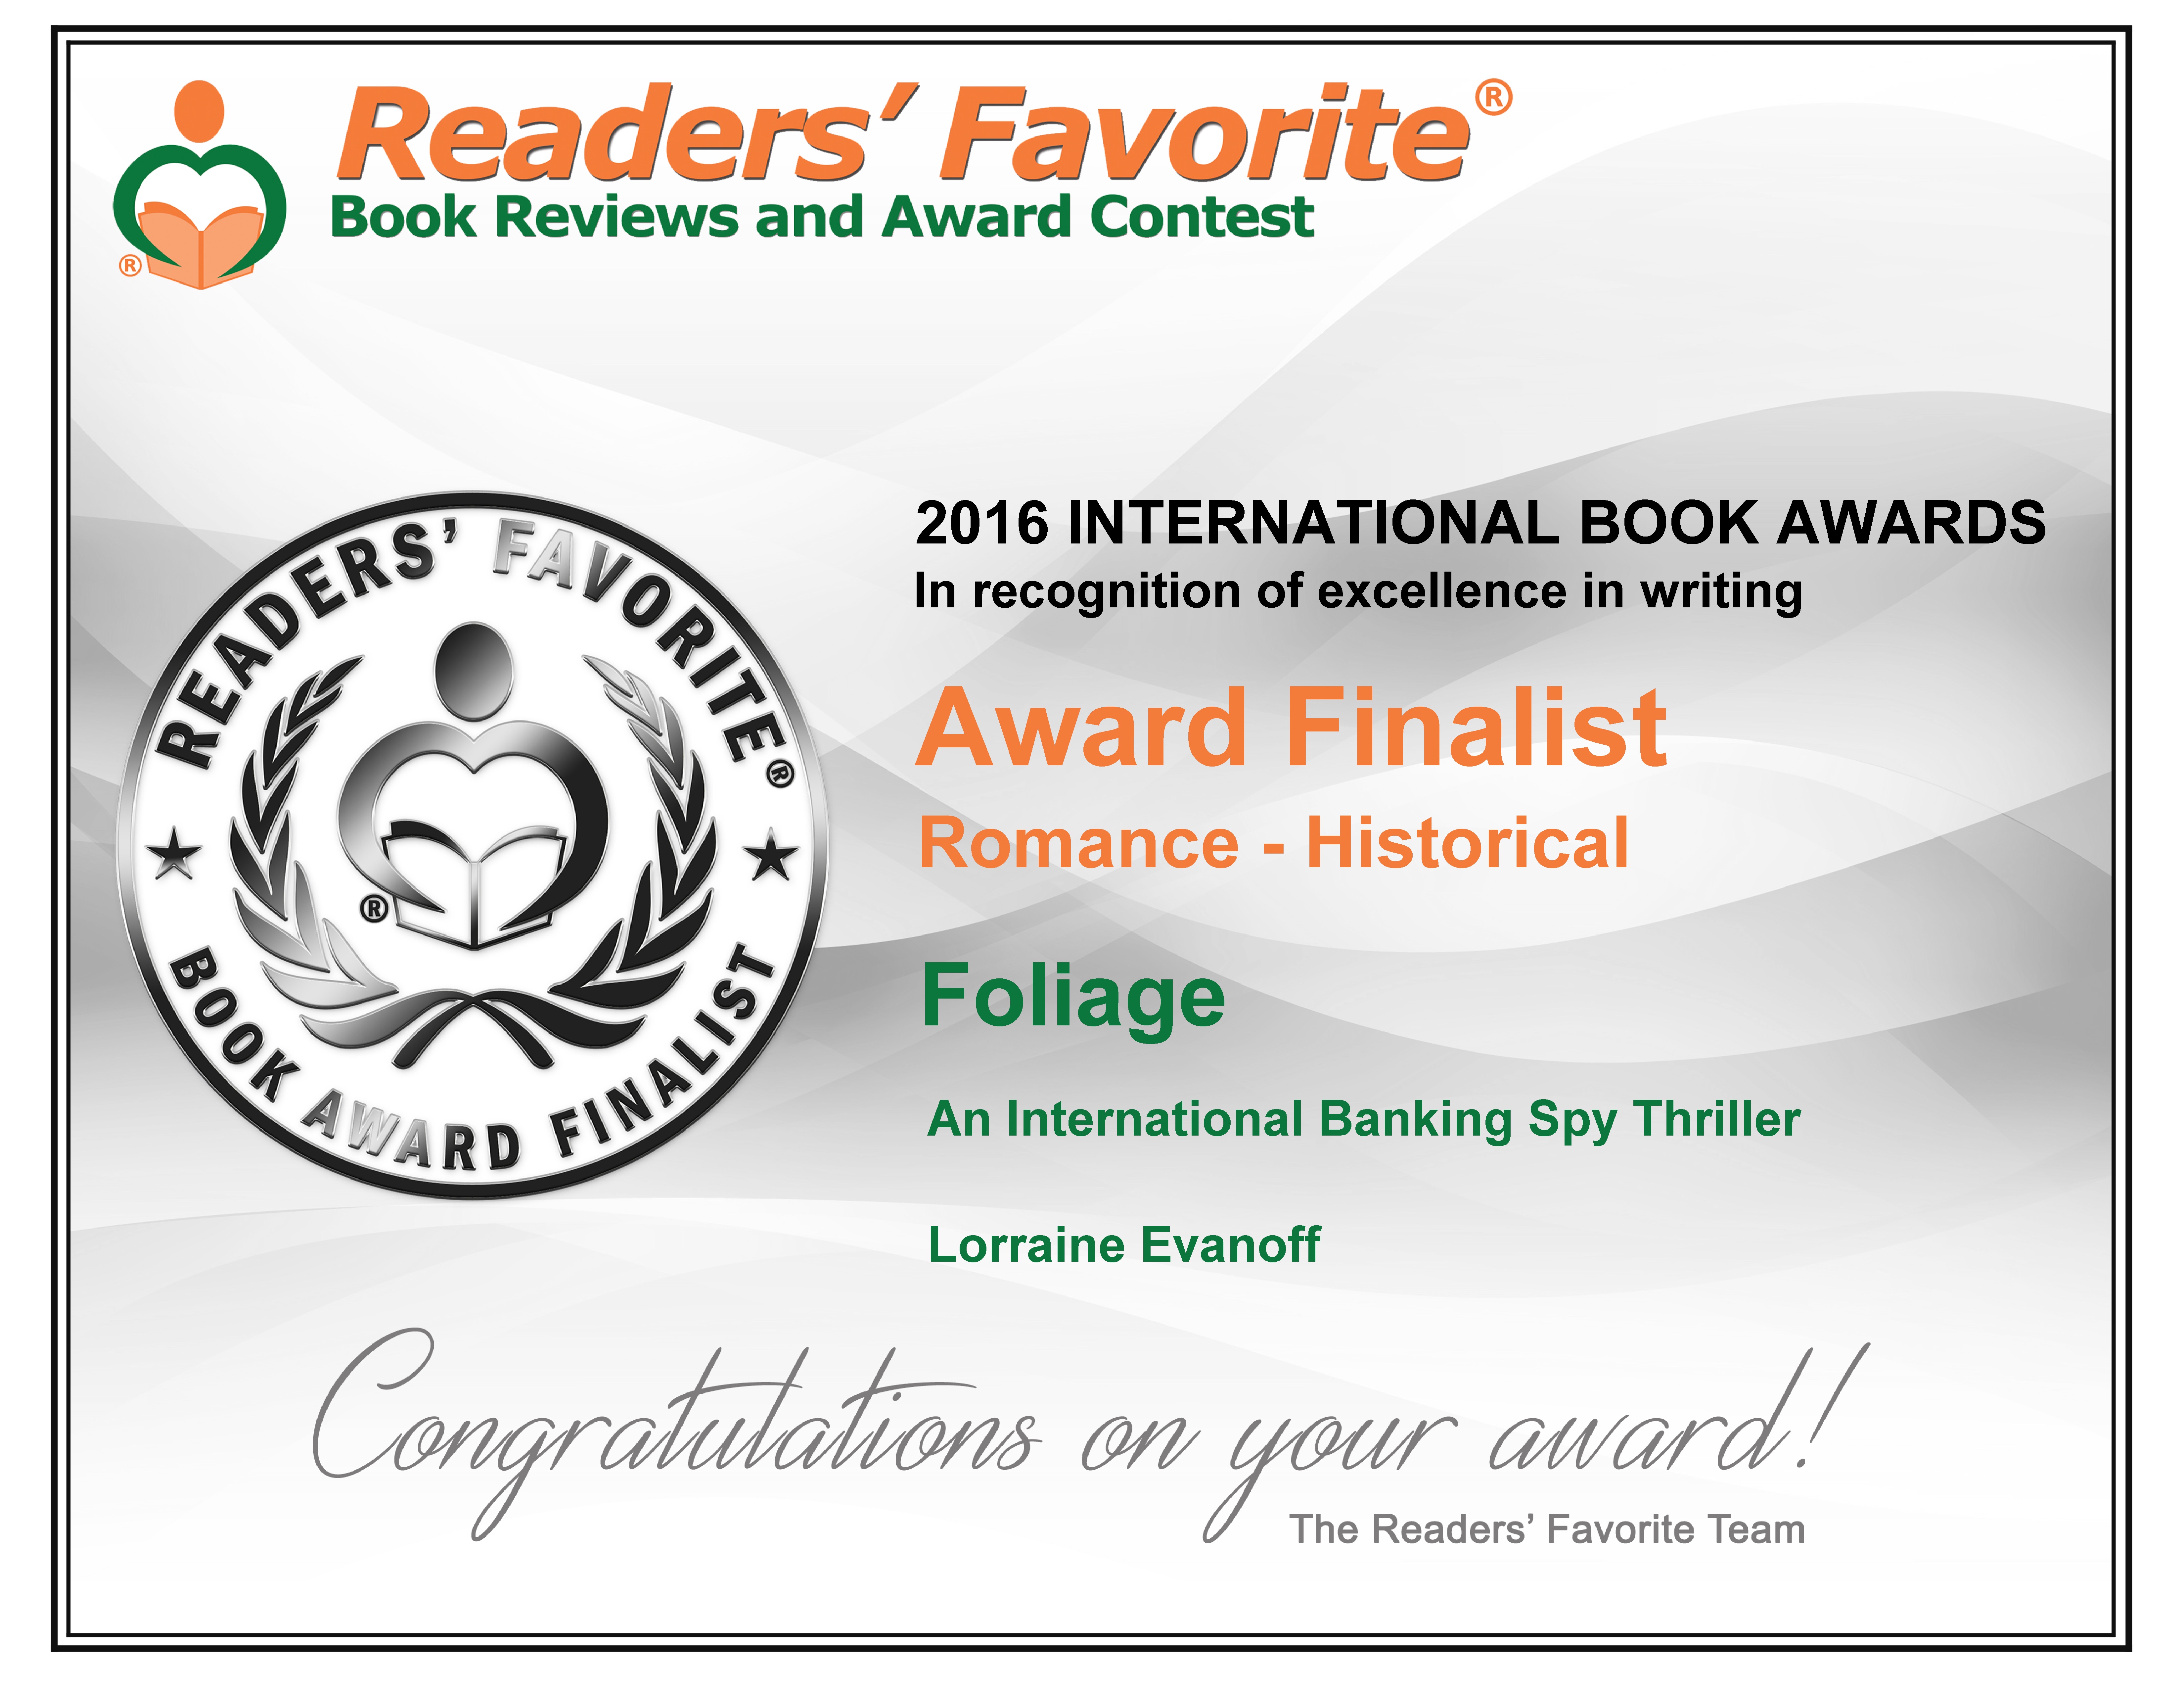 Reader's Favorite recognizes “Foliage” in its 2016 international book award contest.